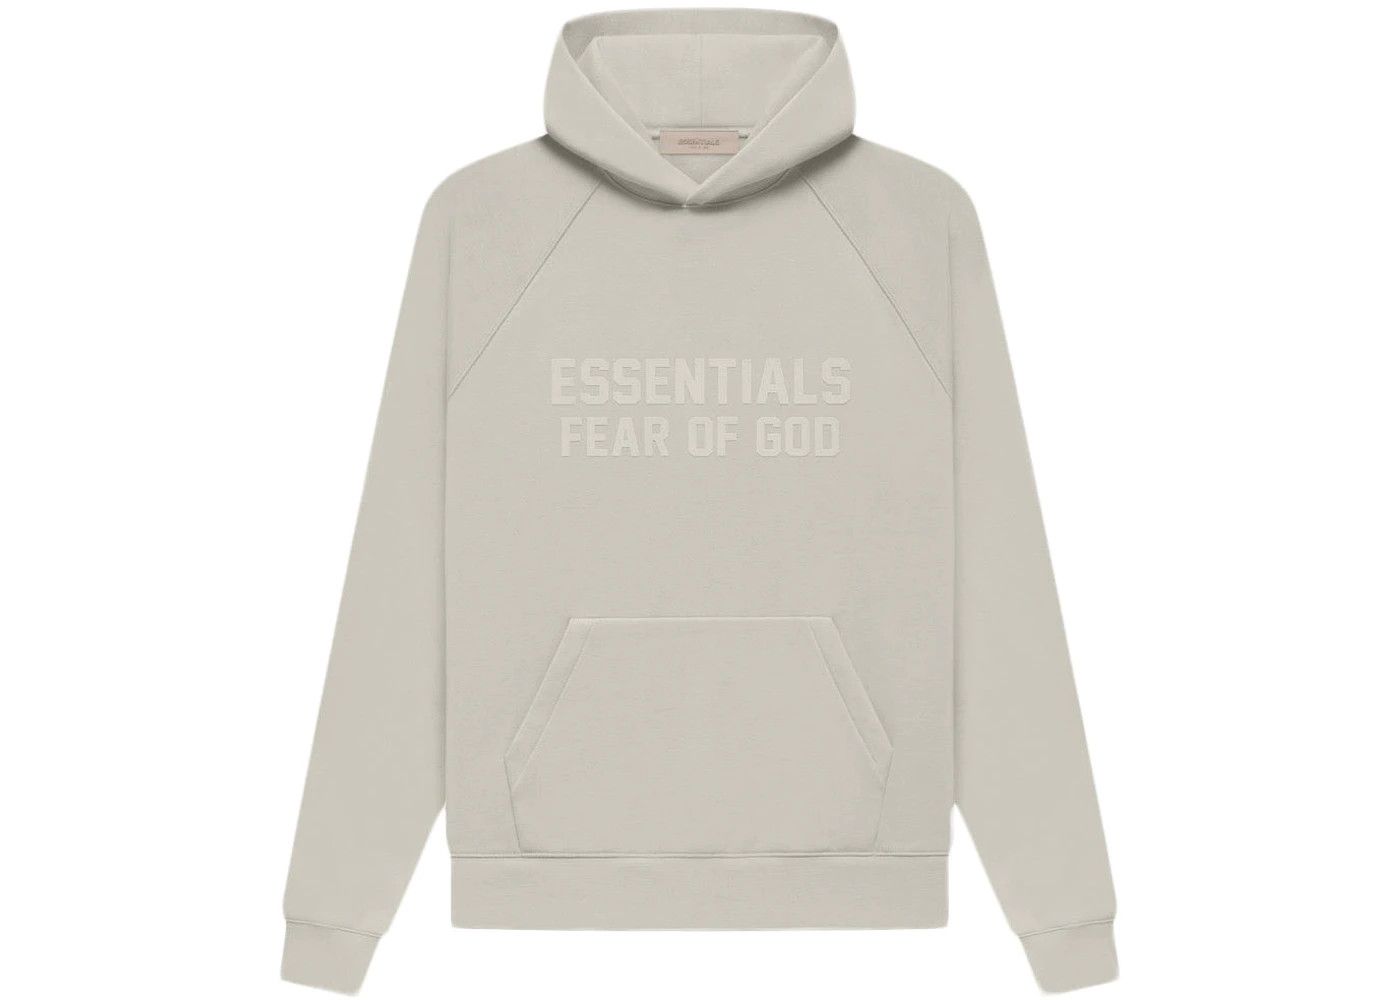 Fear of God Fear of God Essentials Hoodie Smoke Size Large | Grailed